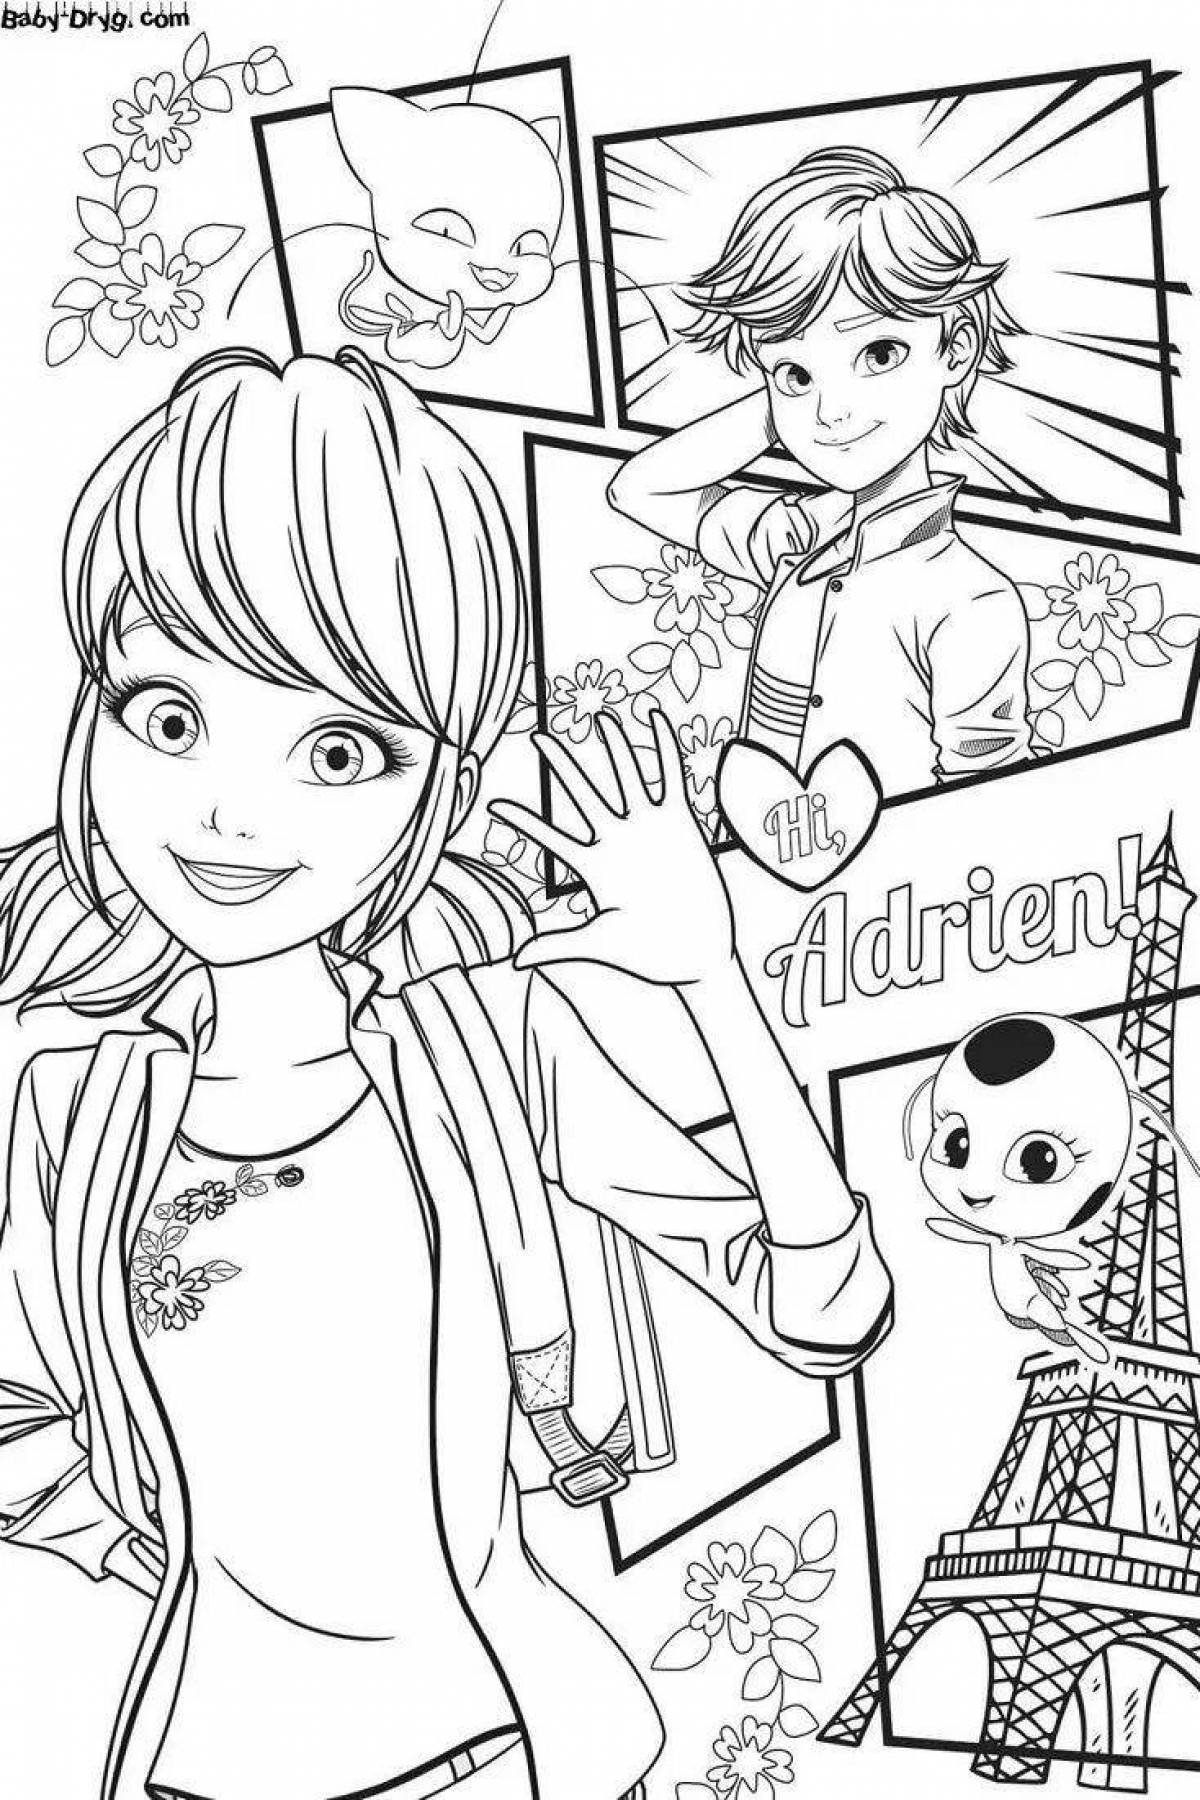 Marinette's fun coloring book for kids